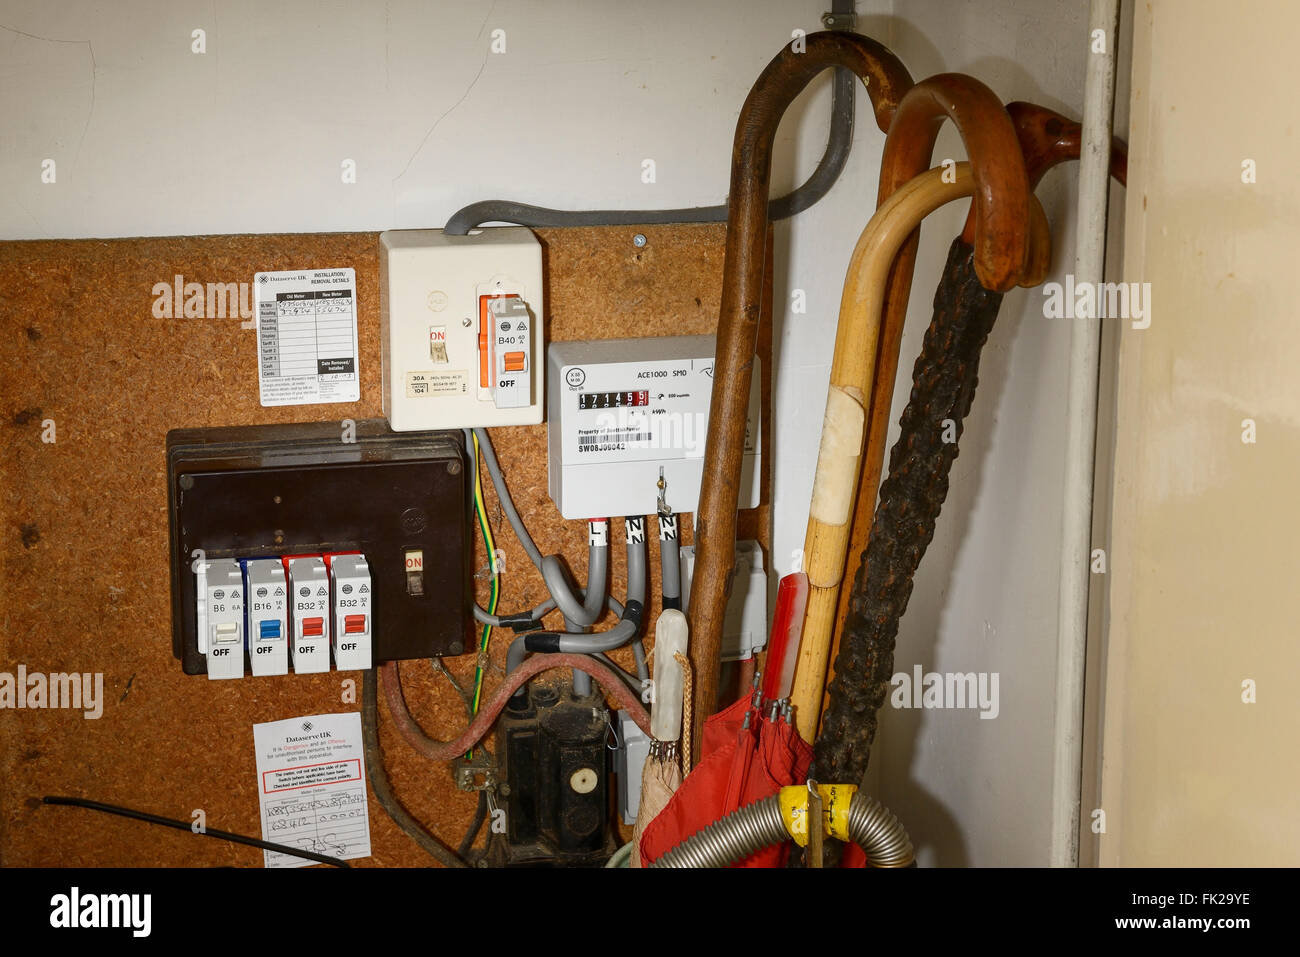 An old style electricity meter with fuses in a cupboard Stock Photo